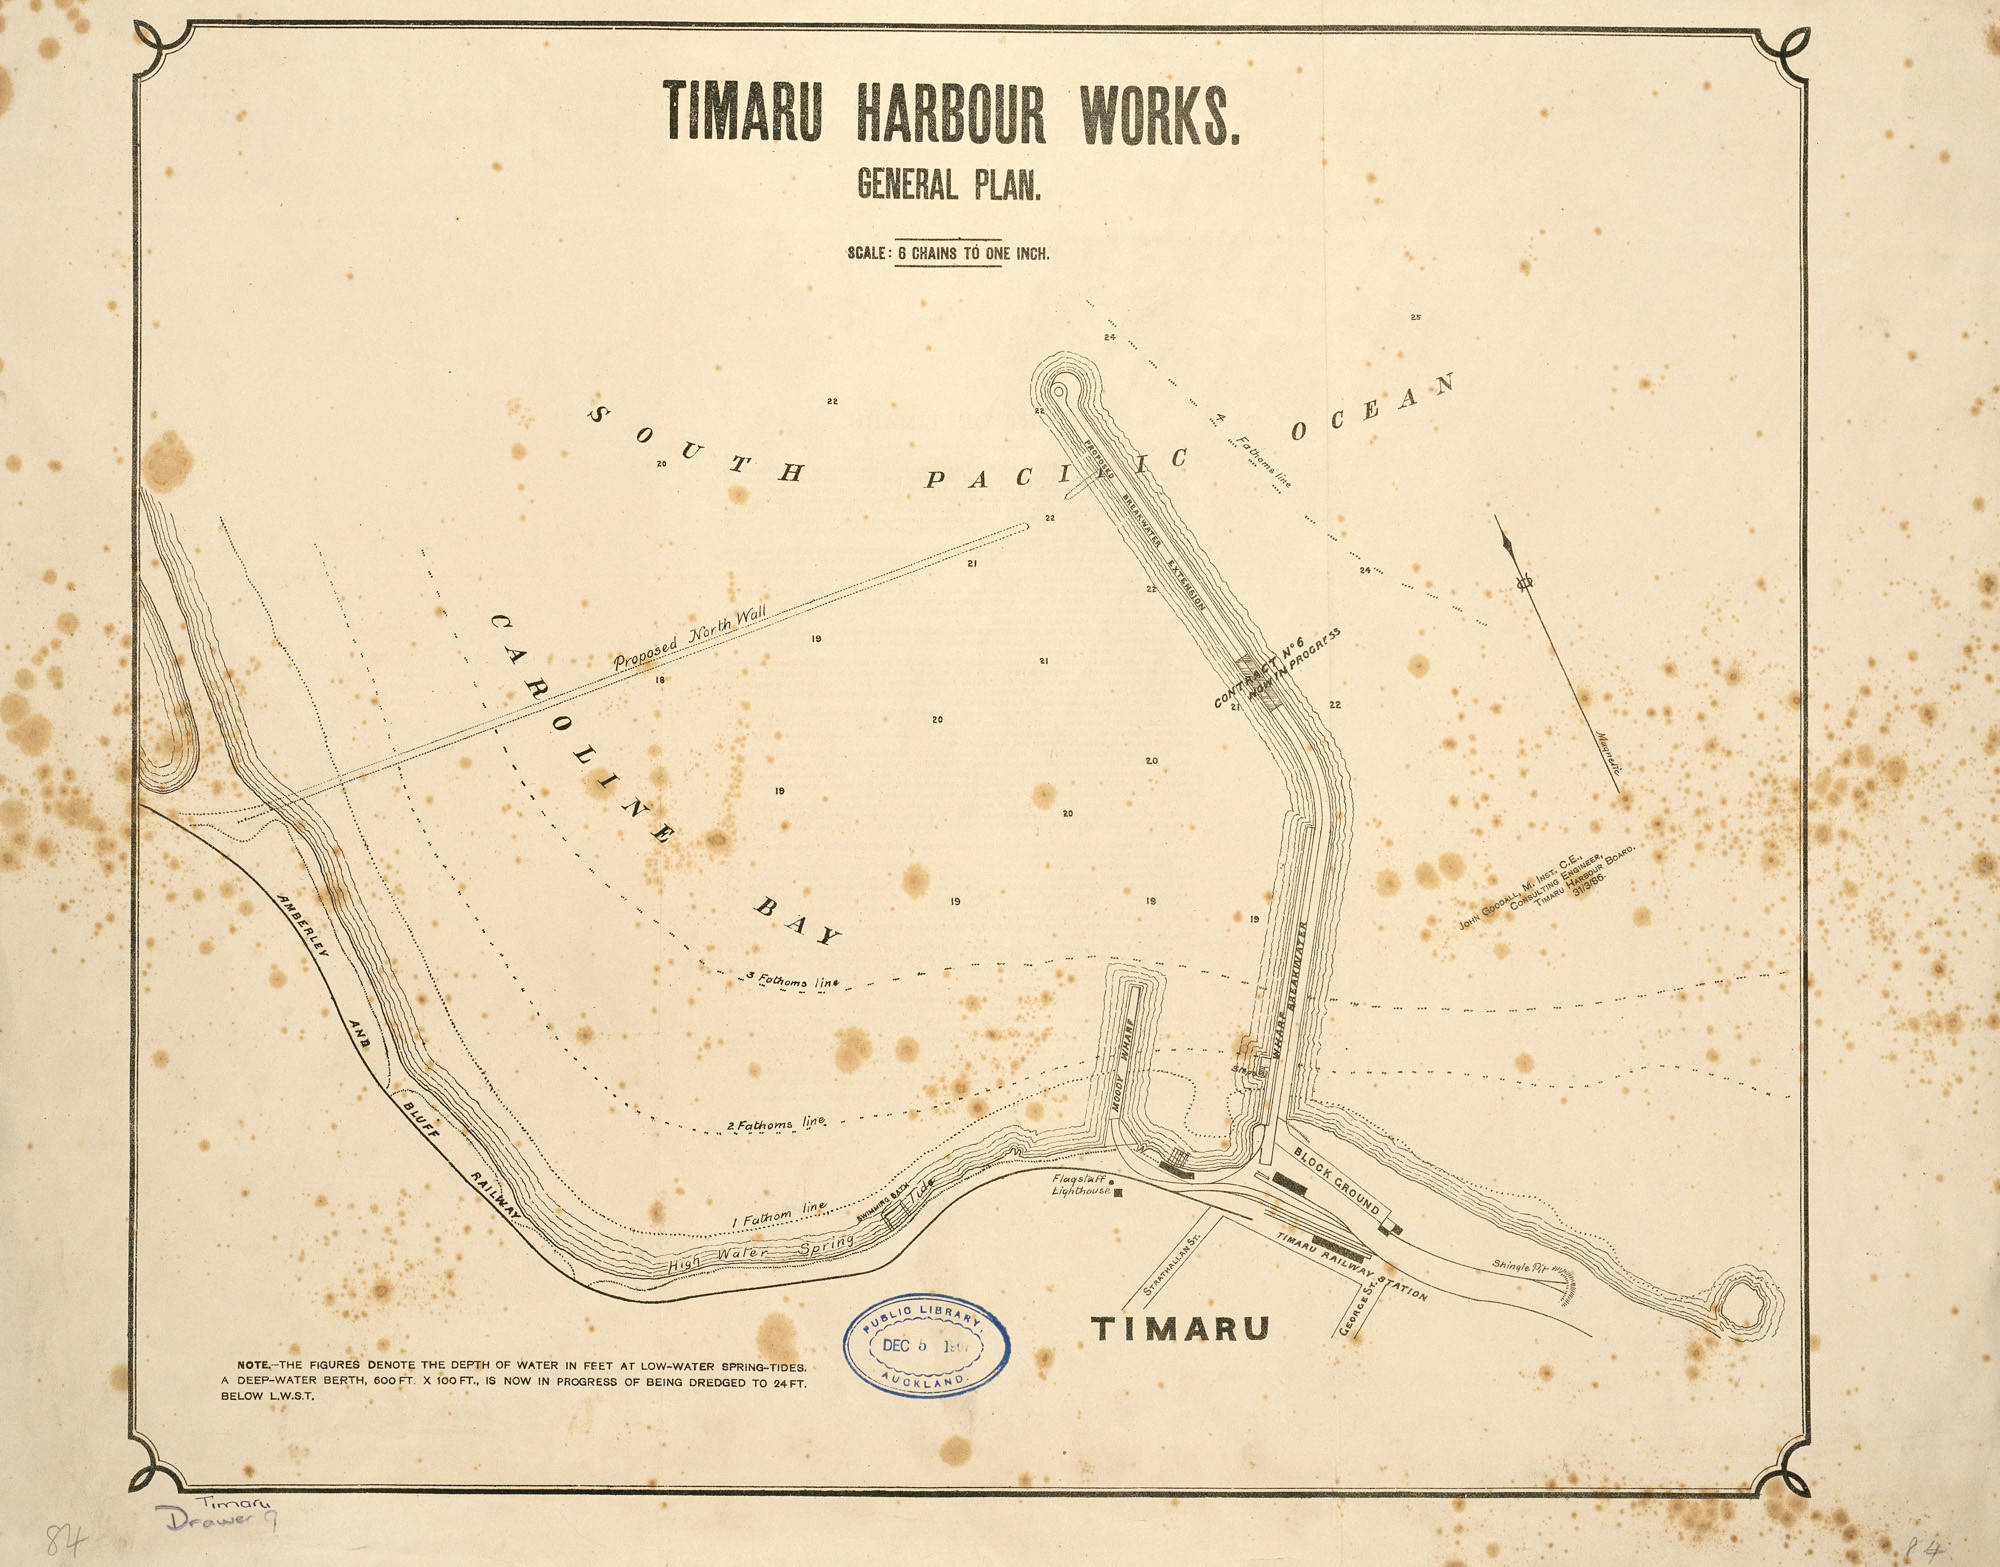 A map of the works to be carried out in Timaru Harbour